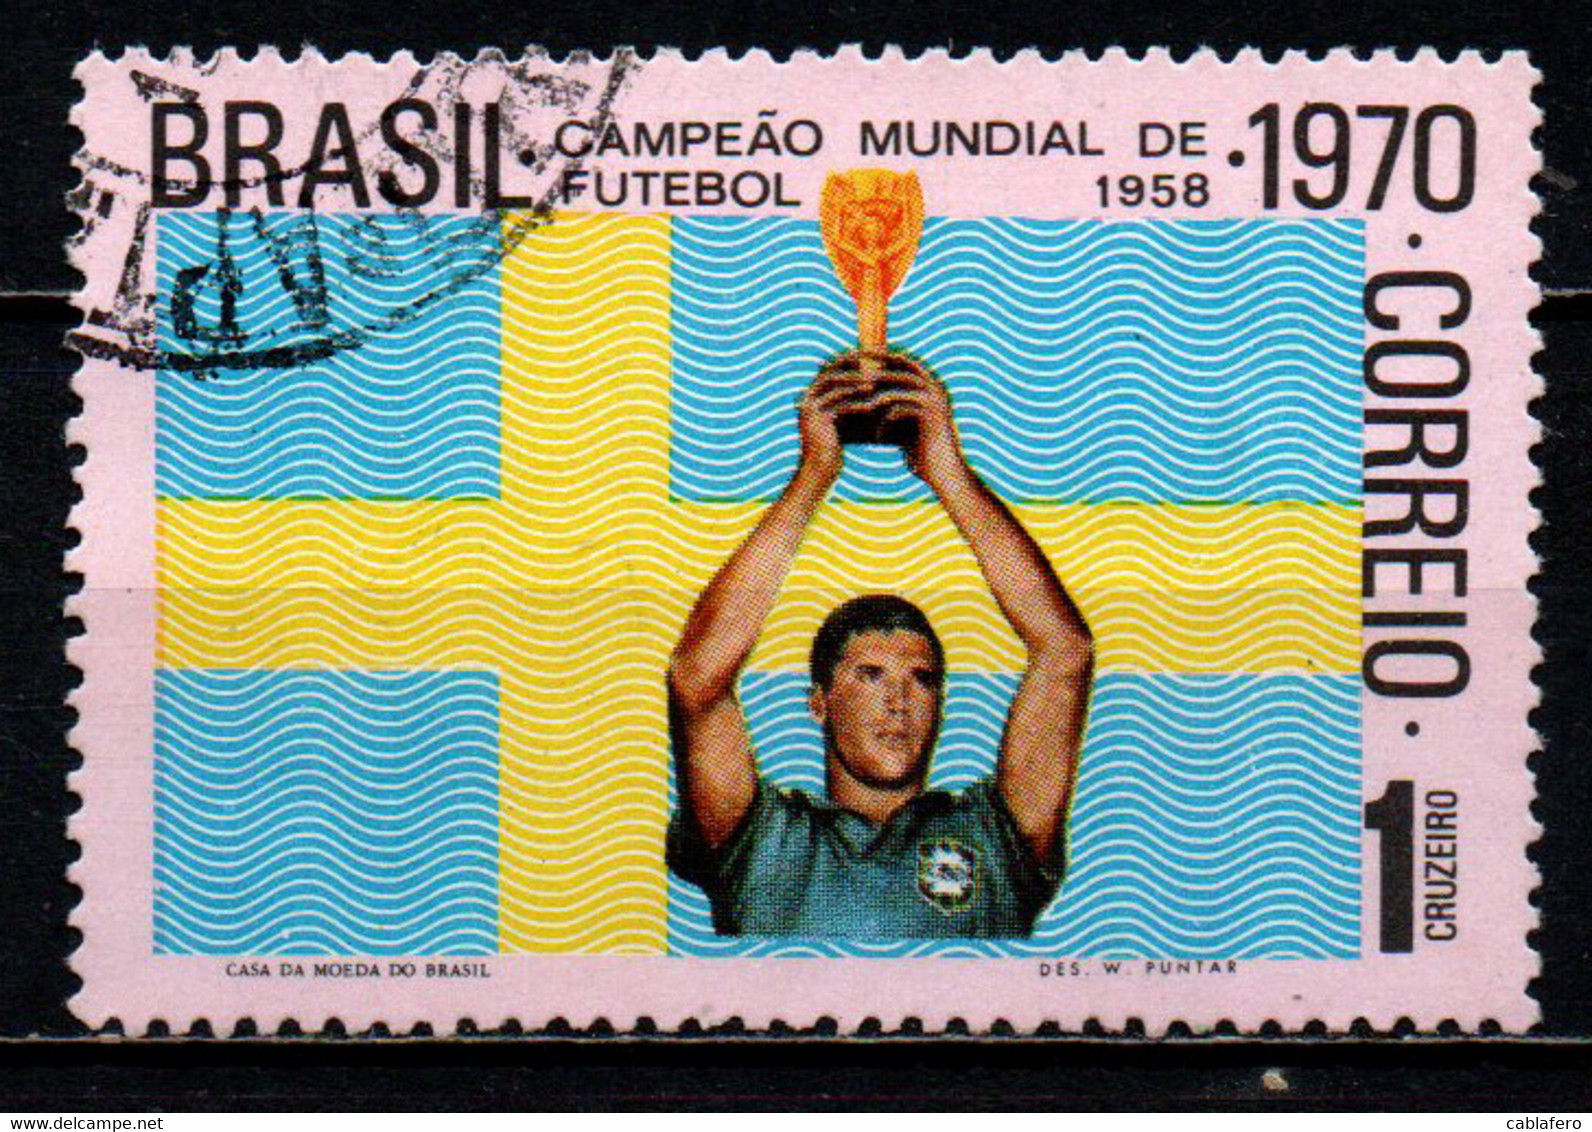 BRASILE - 1970 - 9th World Soccer Championships For The Jules Rimet Cup, Mexico City - USATO - Used Stamps